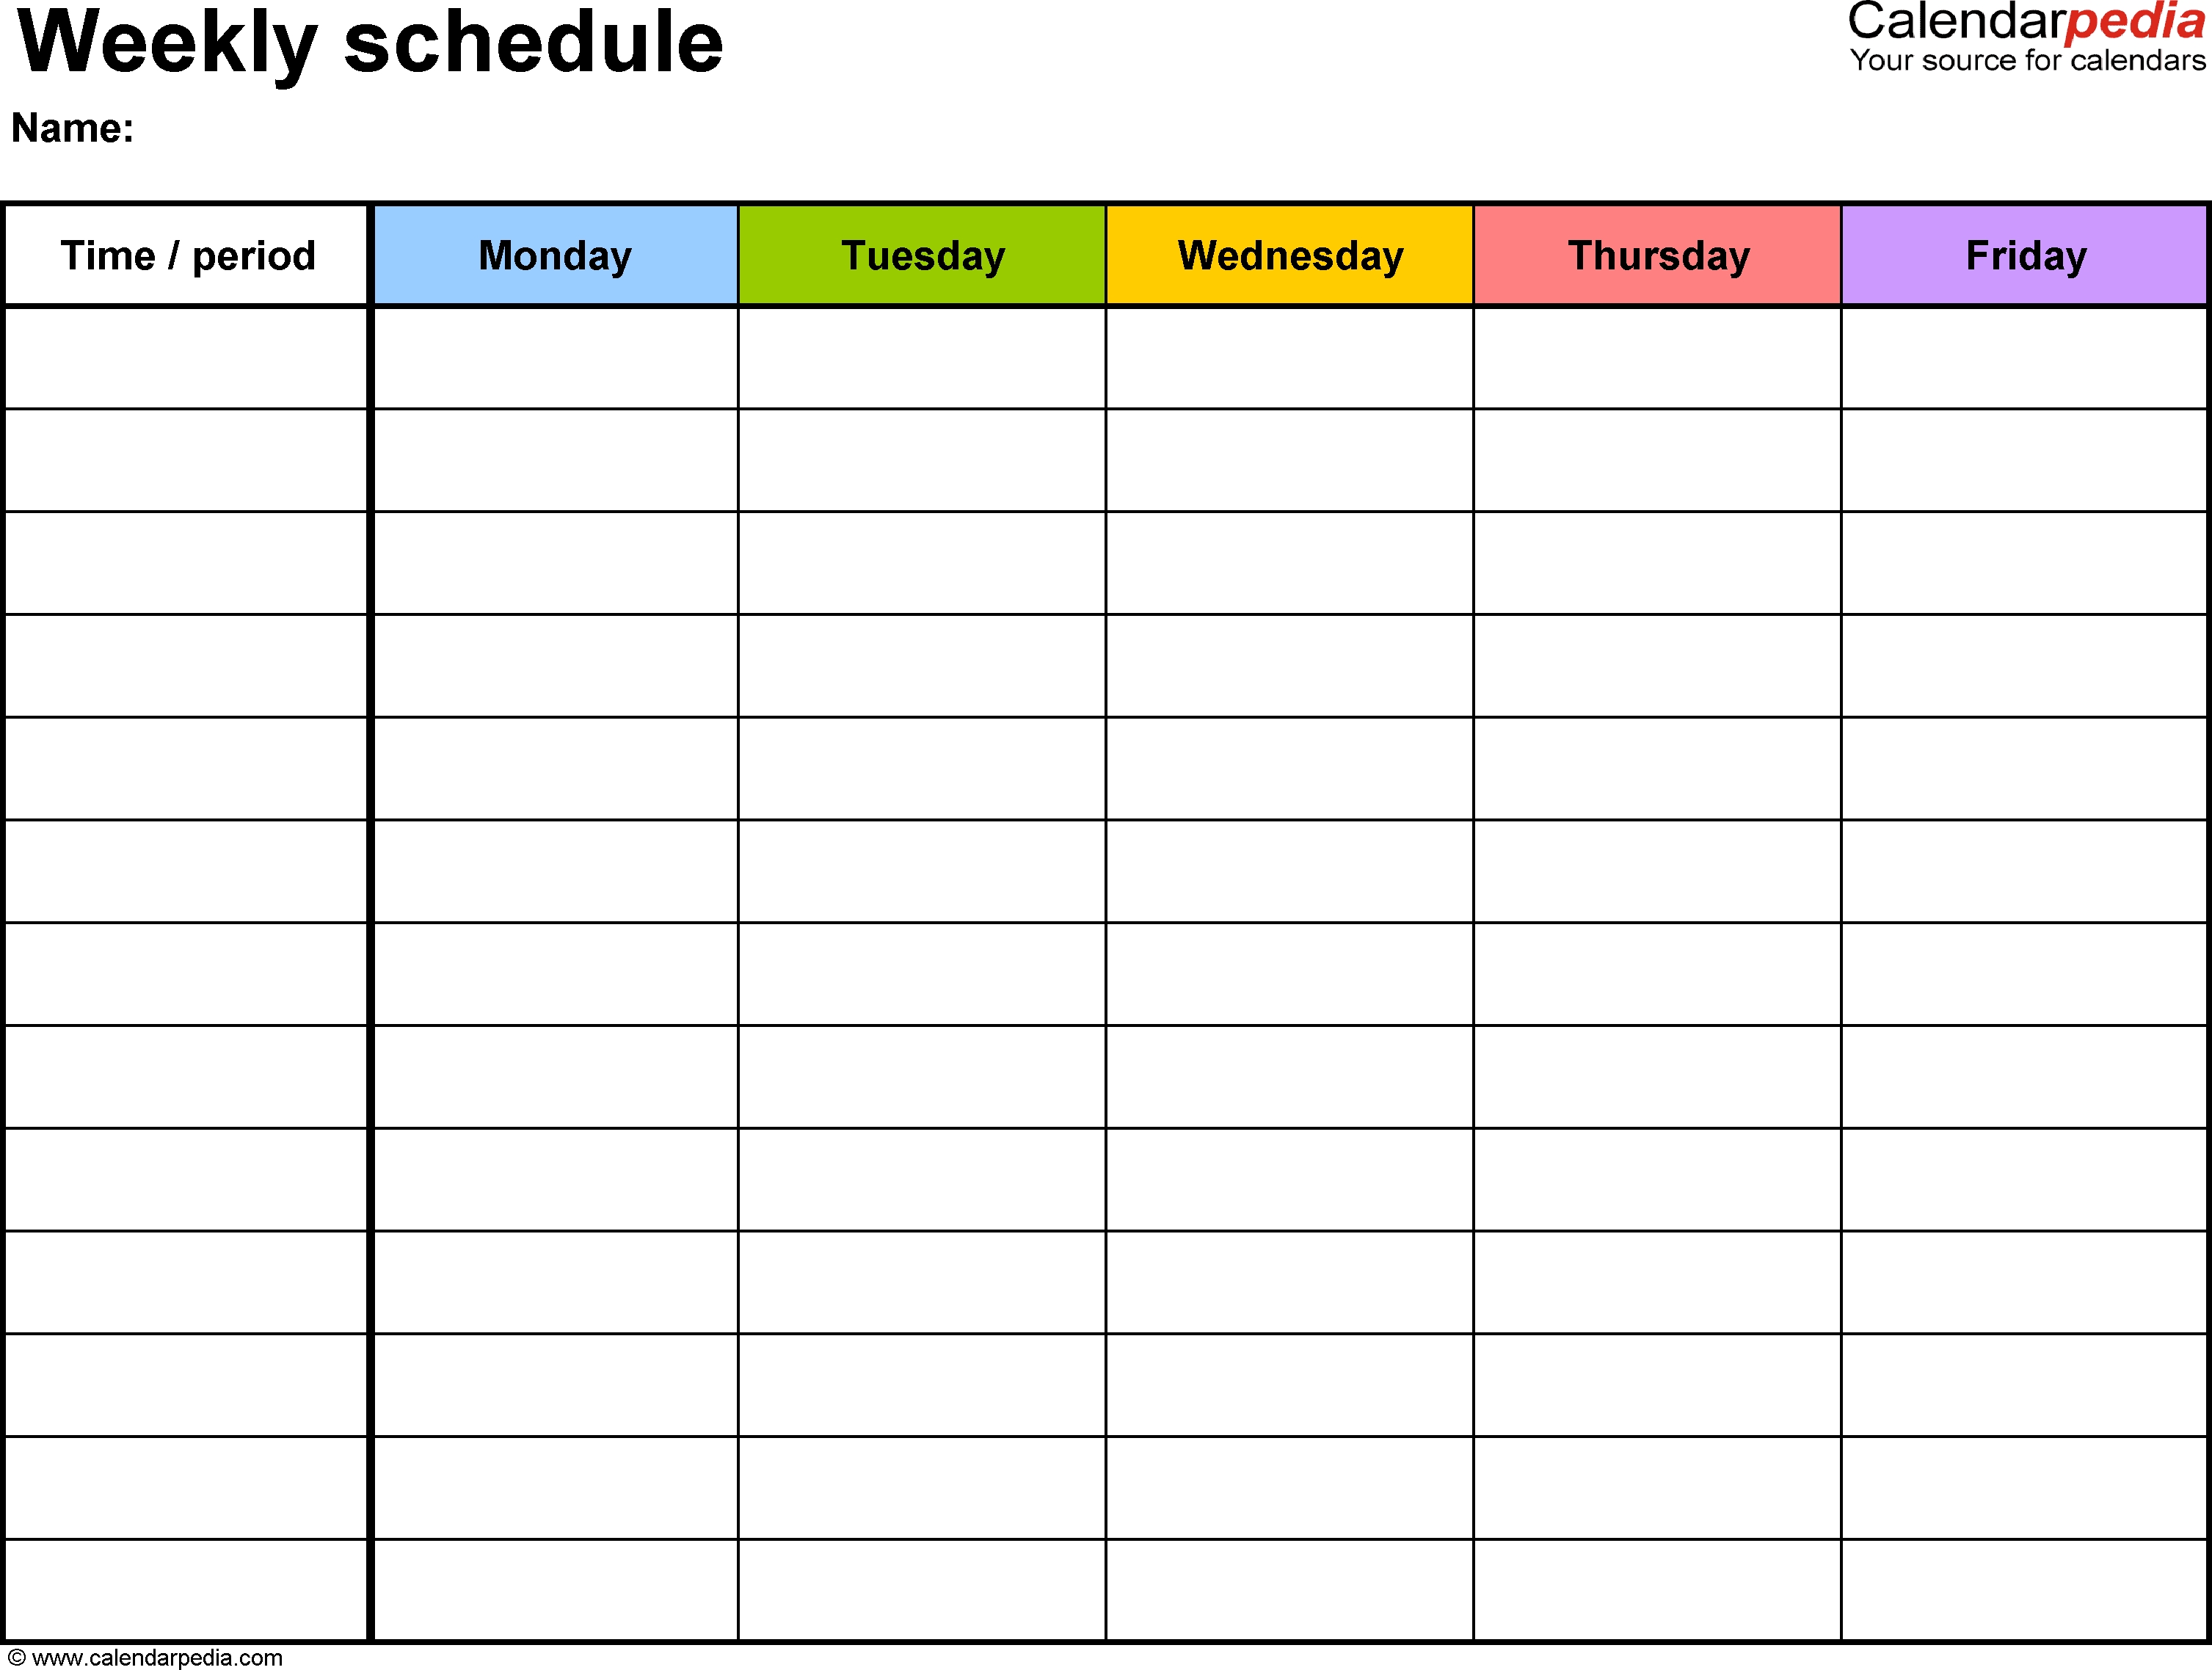 Free Weekly Schedule Templates For Word - 18 Templates-Summer Camp Schedule Template Editable